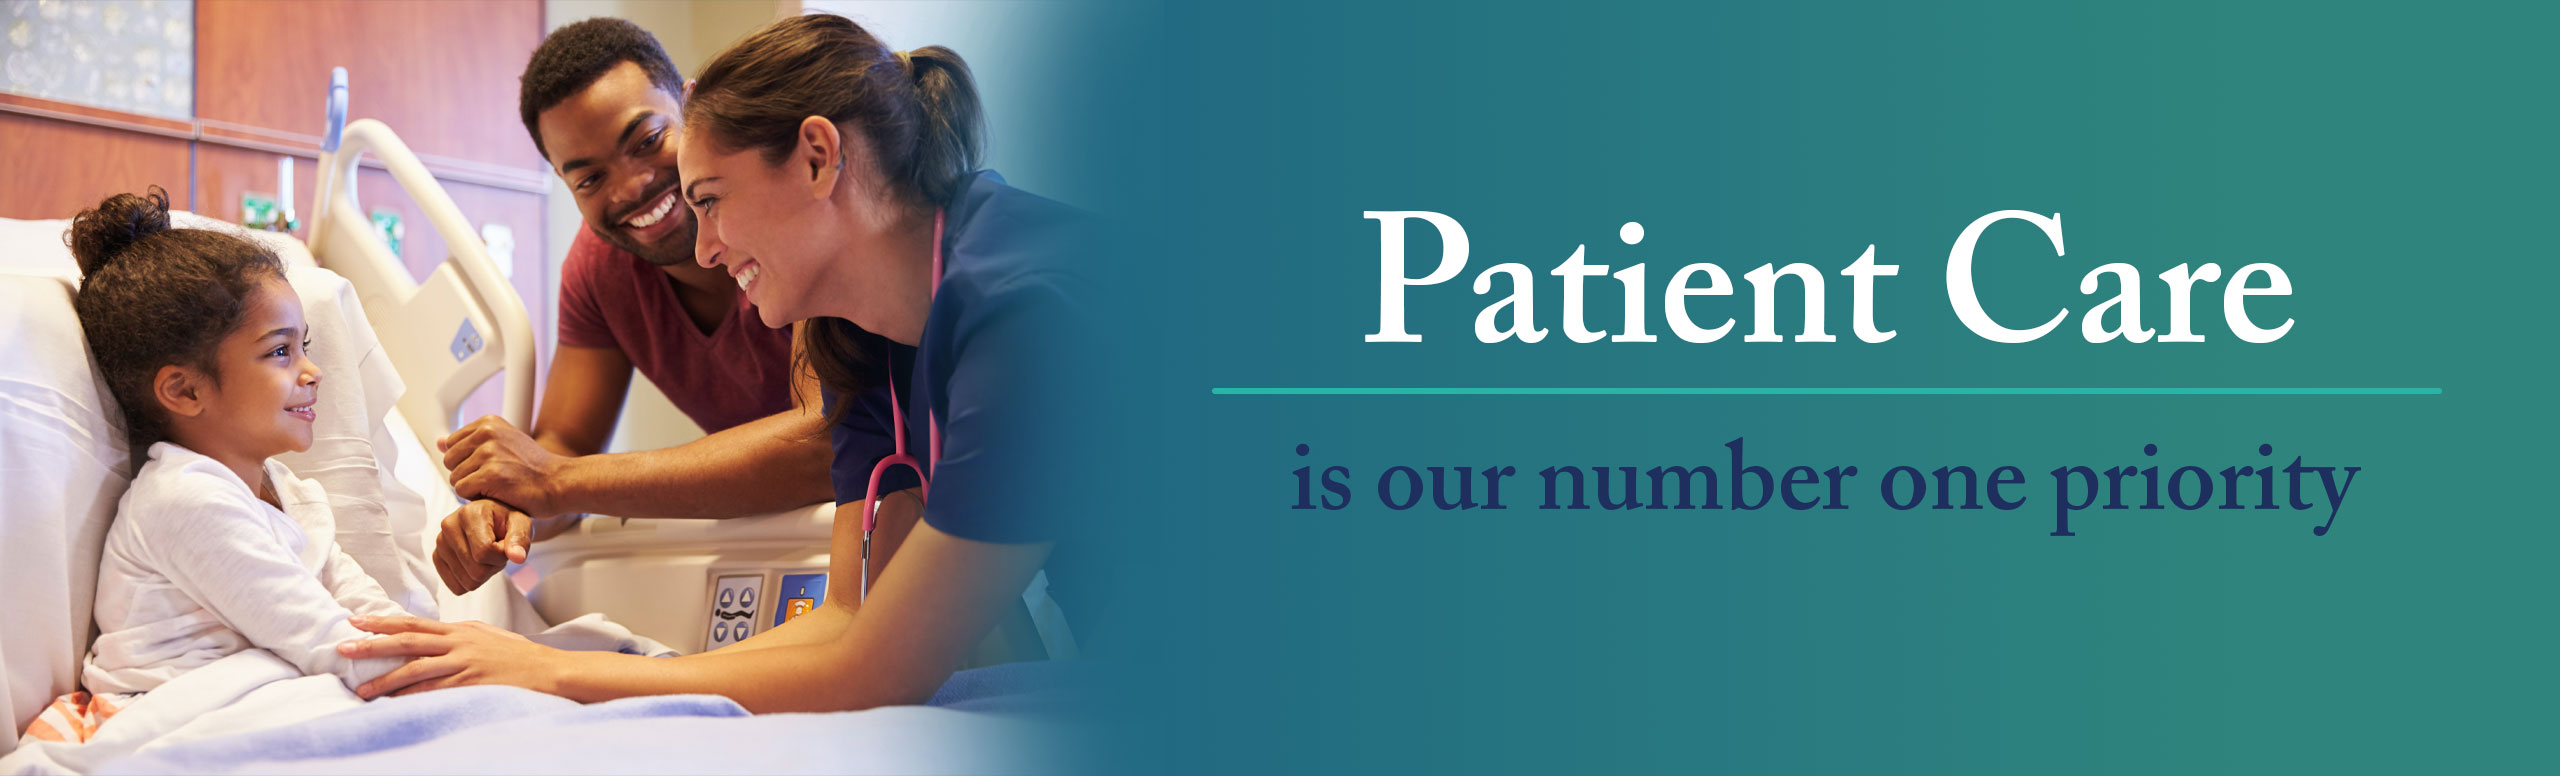 Patient Care
is our number one priority